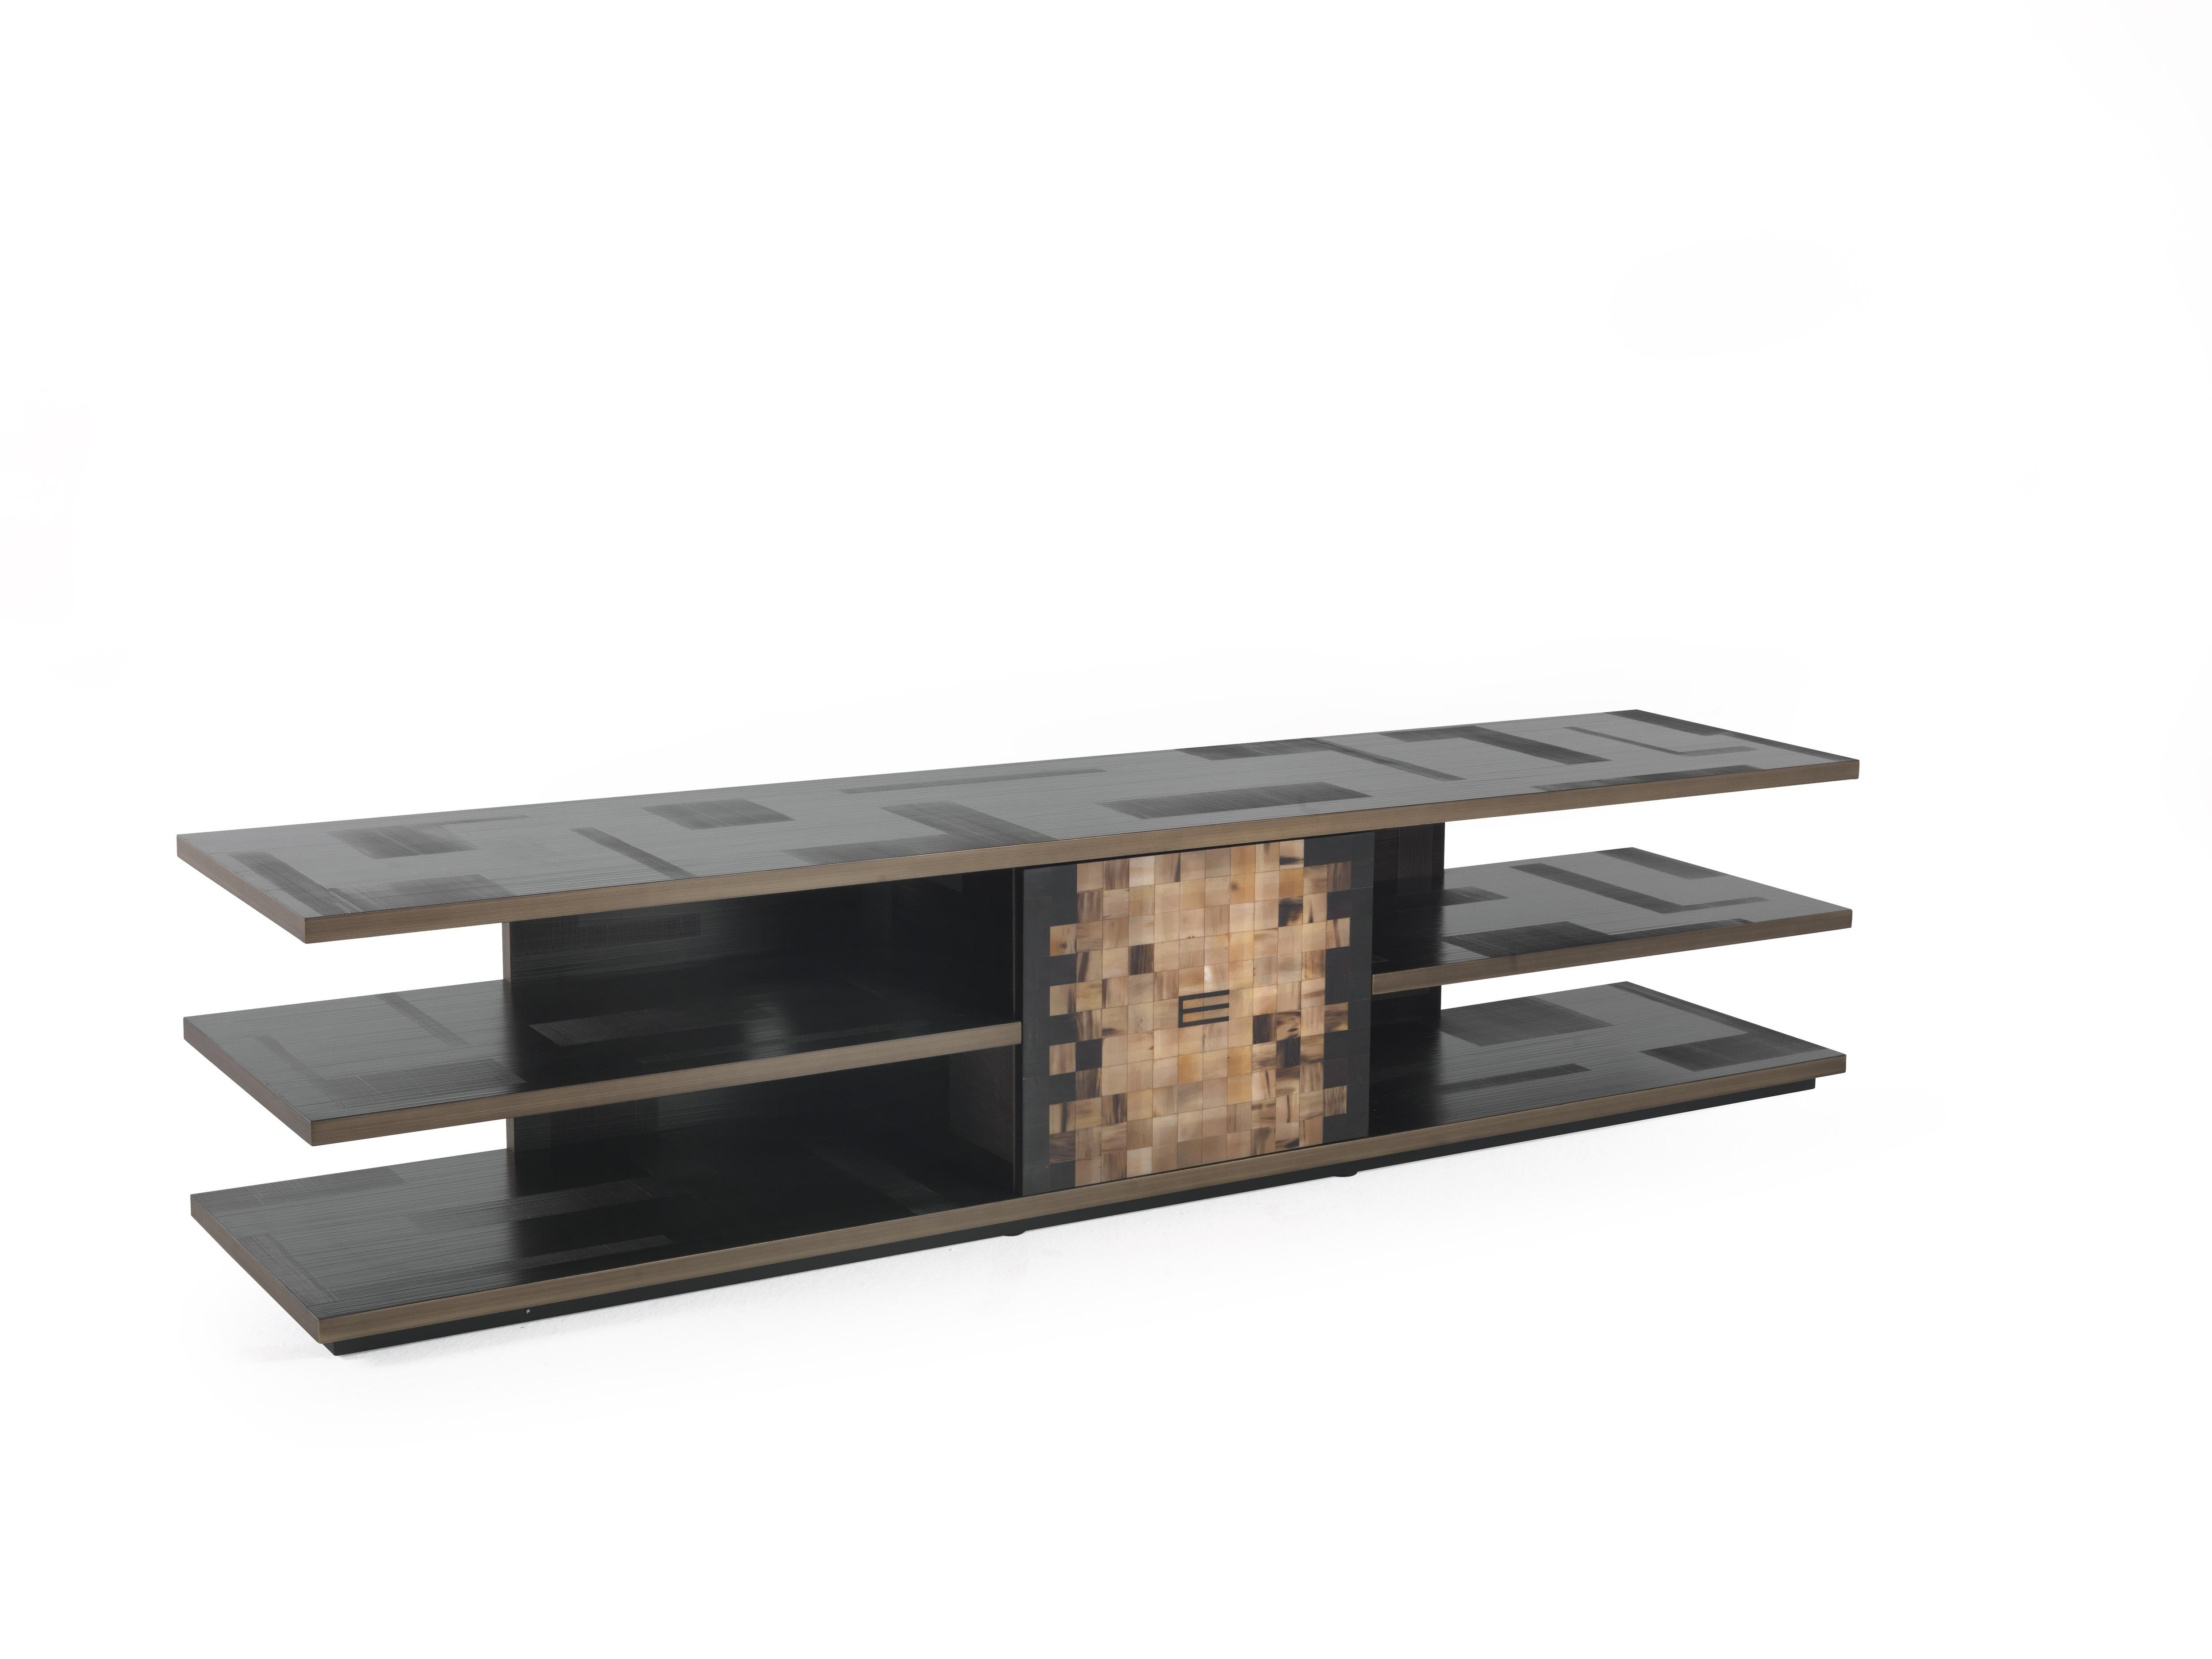 Outstanding craftsmanship, ethnic inspiration and simplicity of the lines: the Aleppo tv holder, with its structure, top and shelves in wood with glossy dark wengè spatula finish is enriched with profiles in patinated bronzed wood and central door